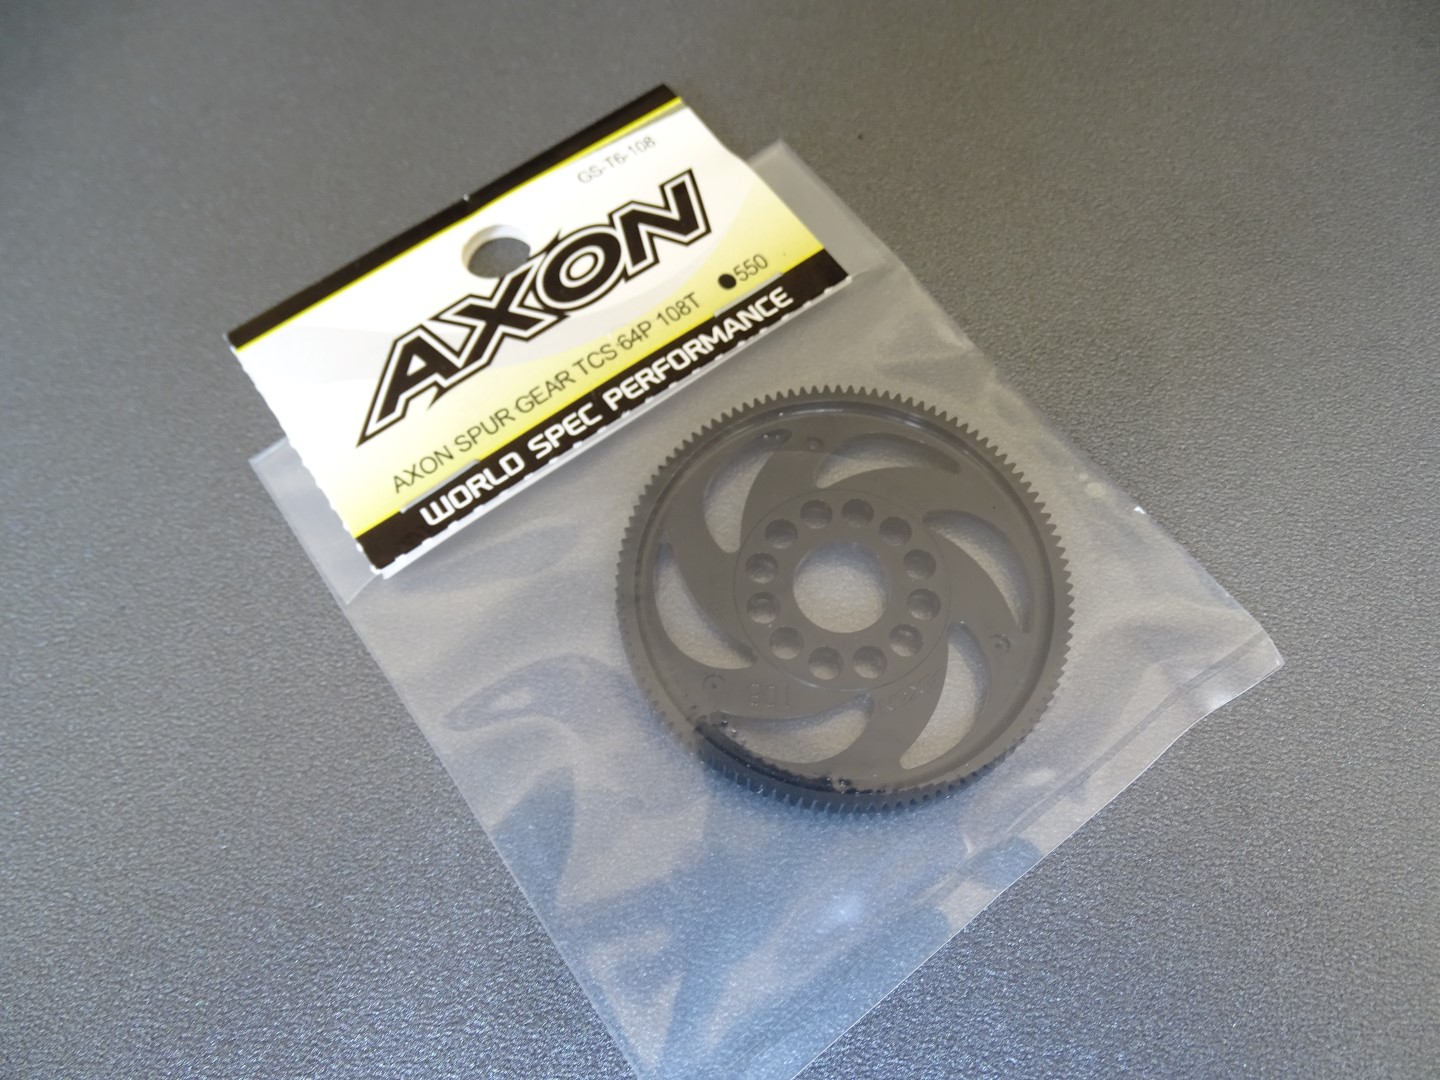 AXON TCS Spur Gear 48P 80T EP 1:10 RC Cars Drift Touring On Road #GS-T4-080 